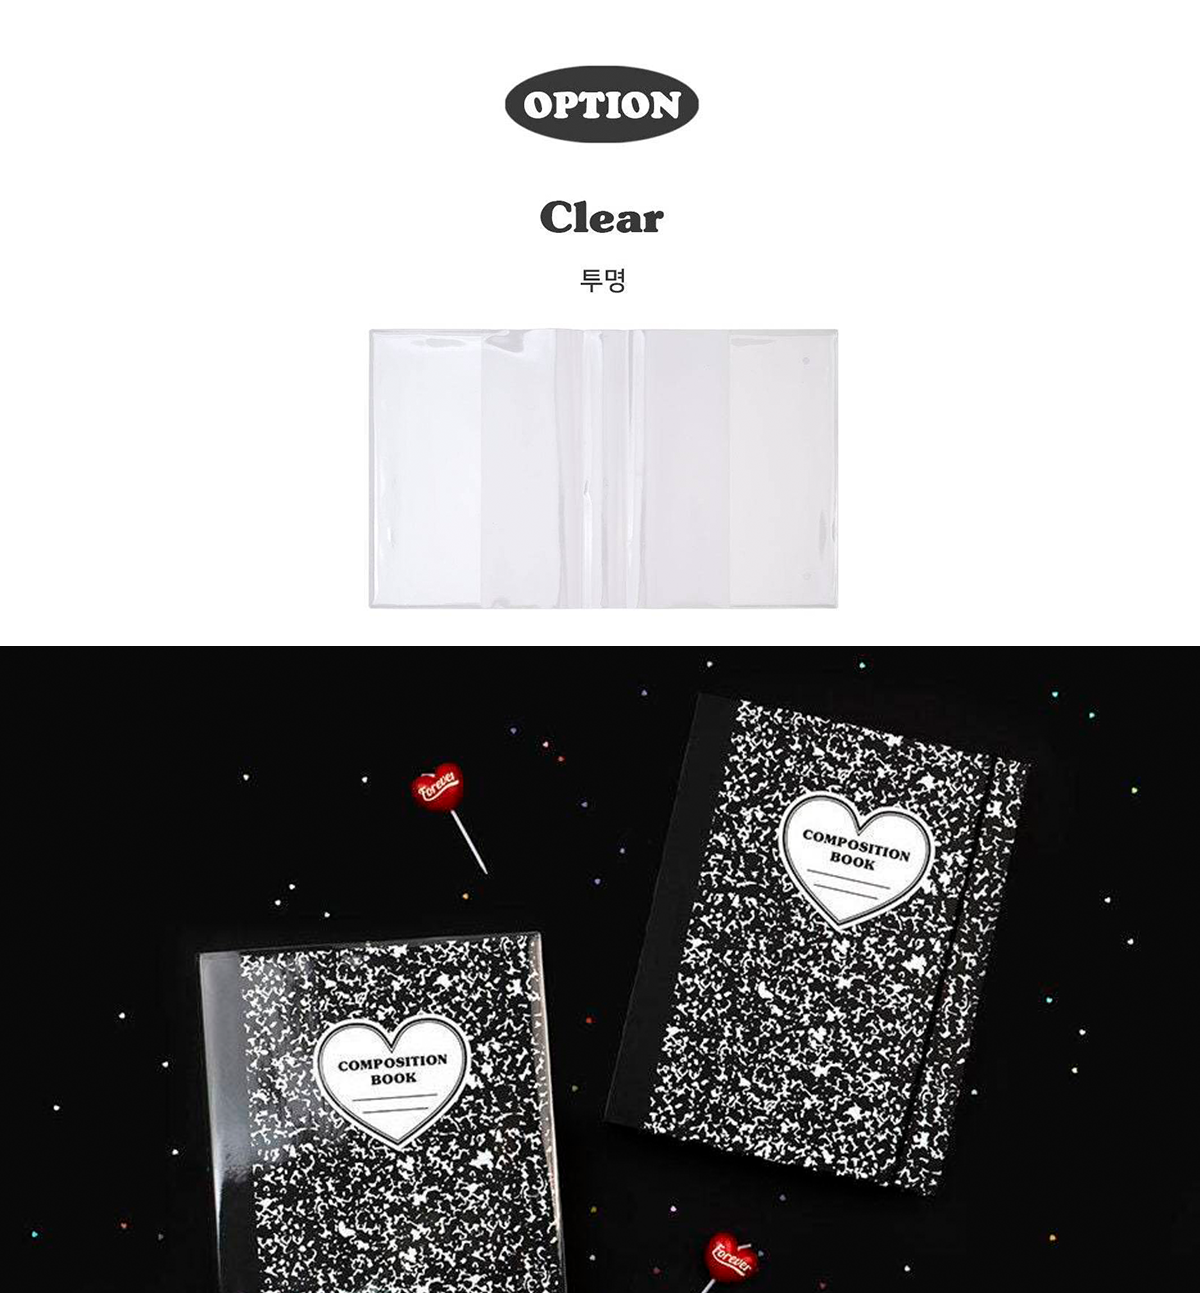 NPR005] A5/B5/A4 Minimalist Transparent Cover with Spring Binder Notebook